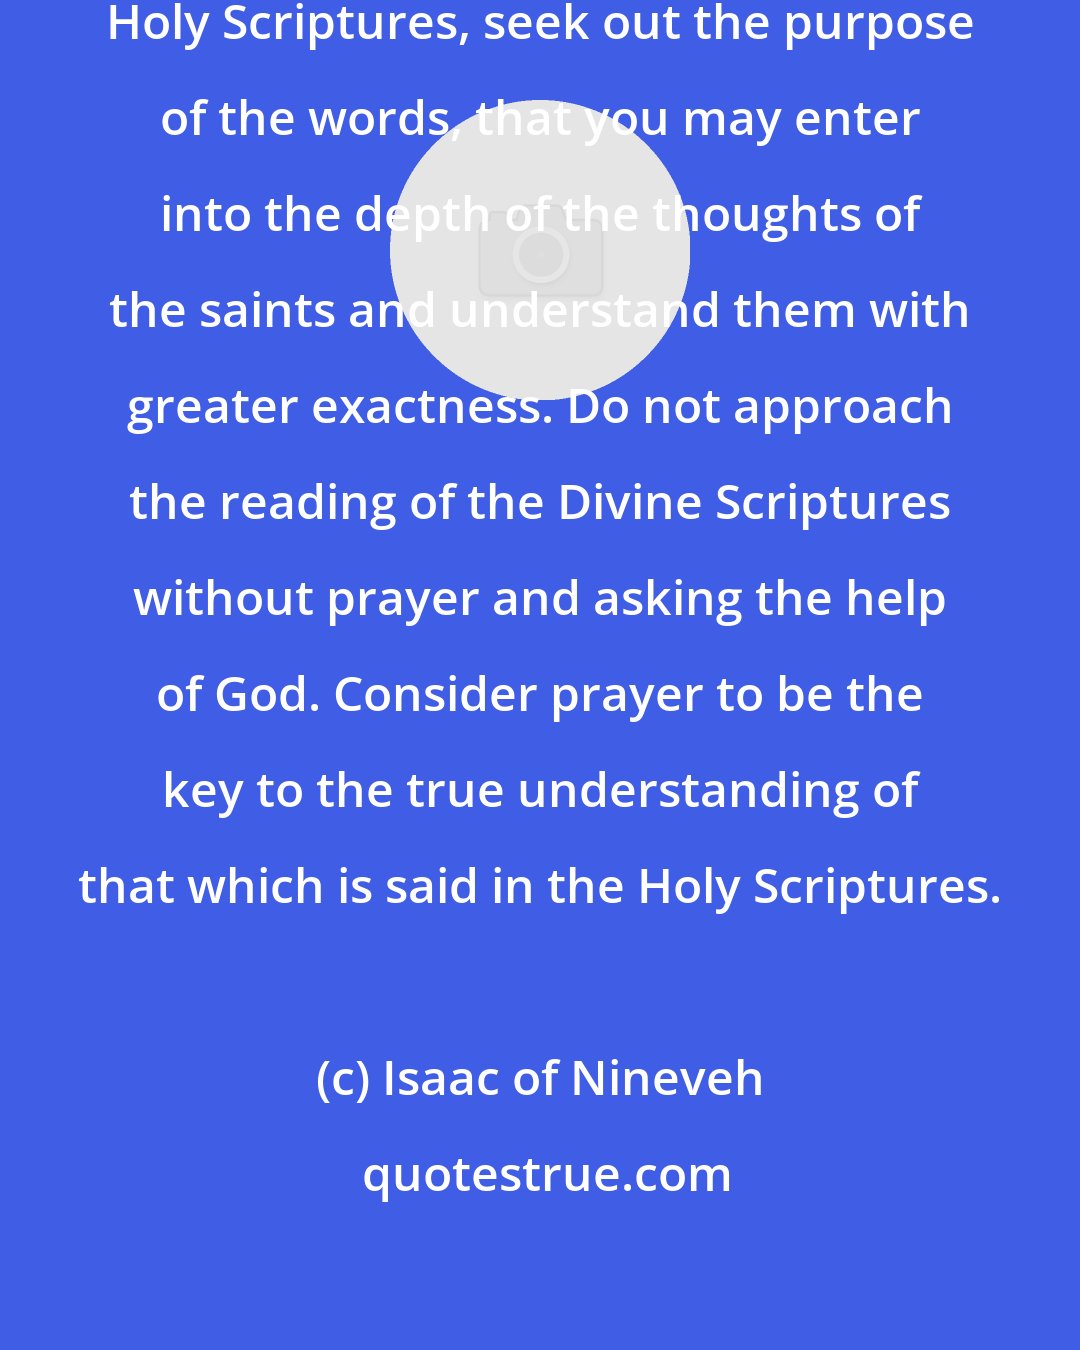 Isaac of Nineveh: In all things that you find in the Holy Scriptures, seek out the purpose of the words, that you may enter into the depth of the thoughts of the saints and understand them with greater exactness. Do not approach the reading of the Divine Scriptures without prayer and asking the help of God. Consider prayer to be the key to the true understanding of that which is said in the Holy Scriptures.